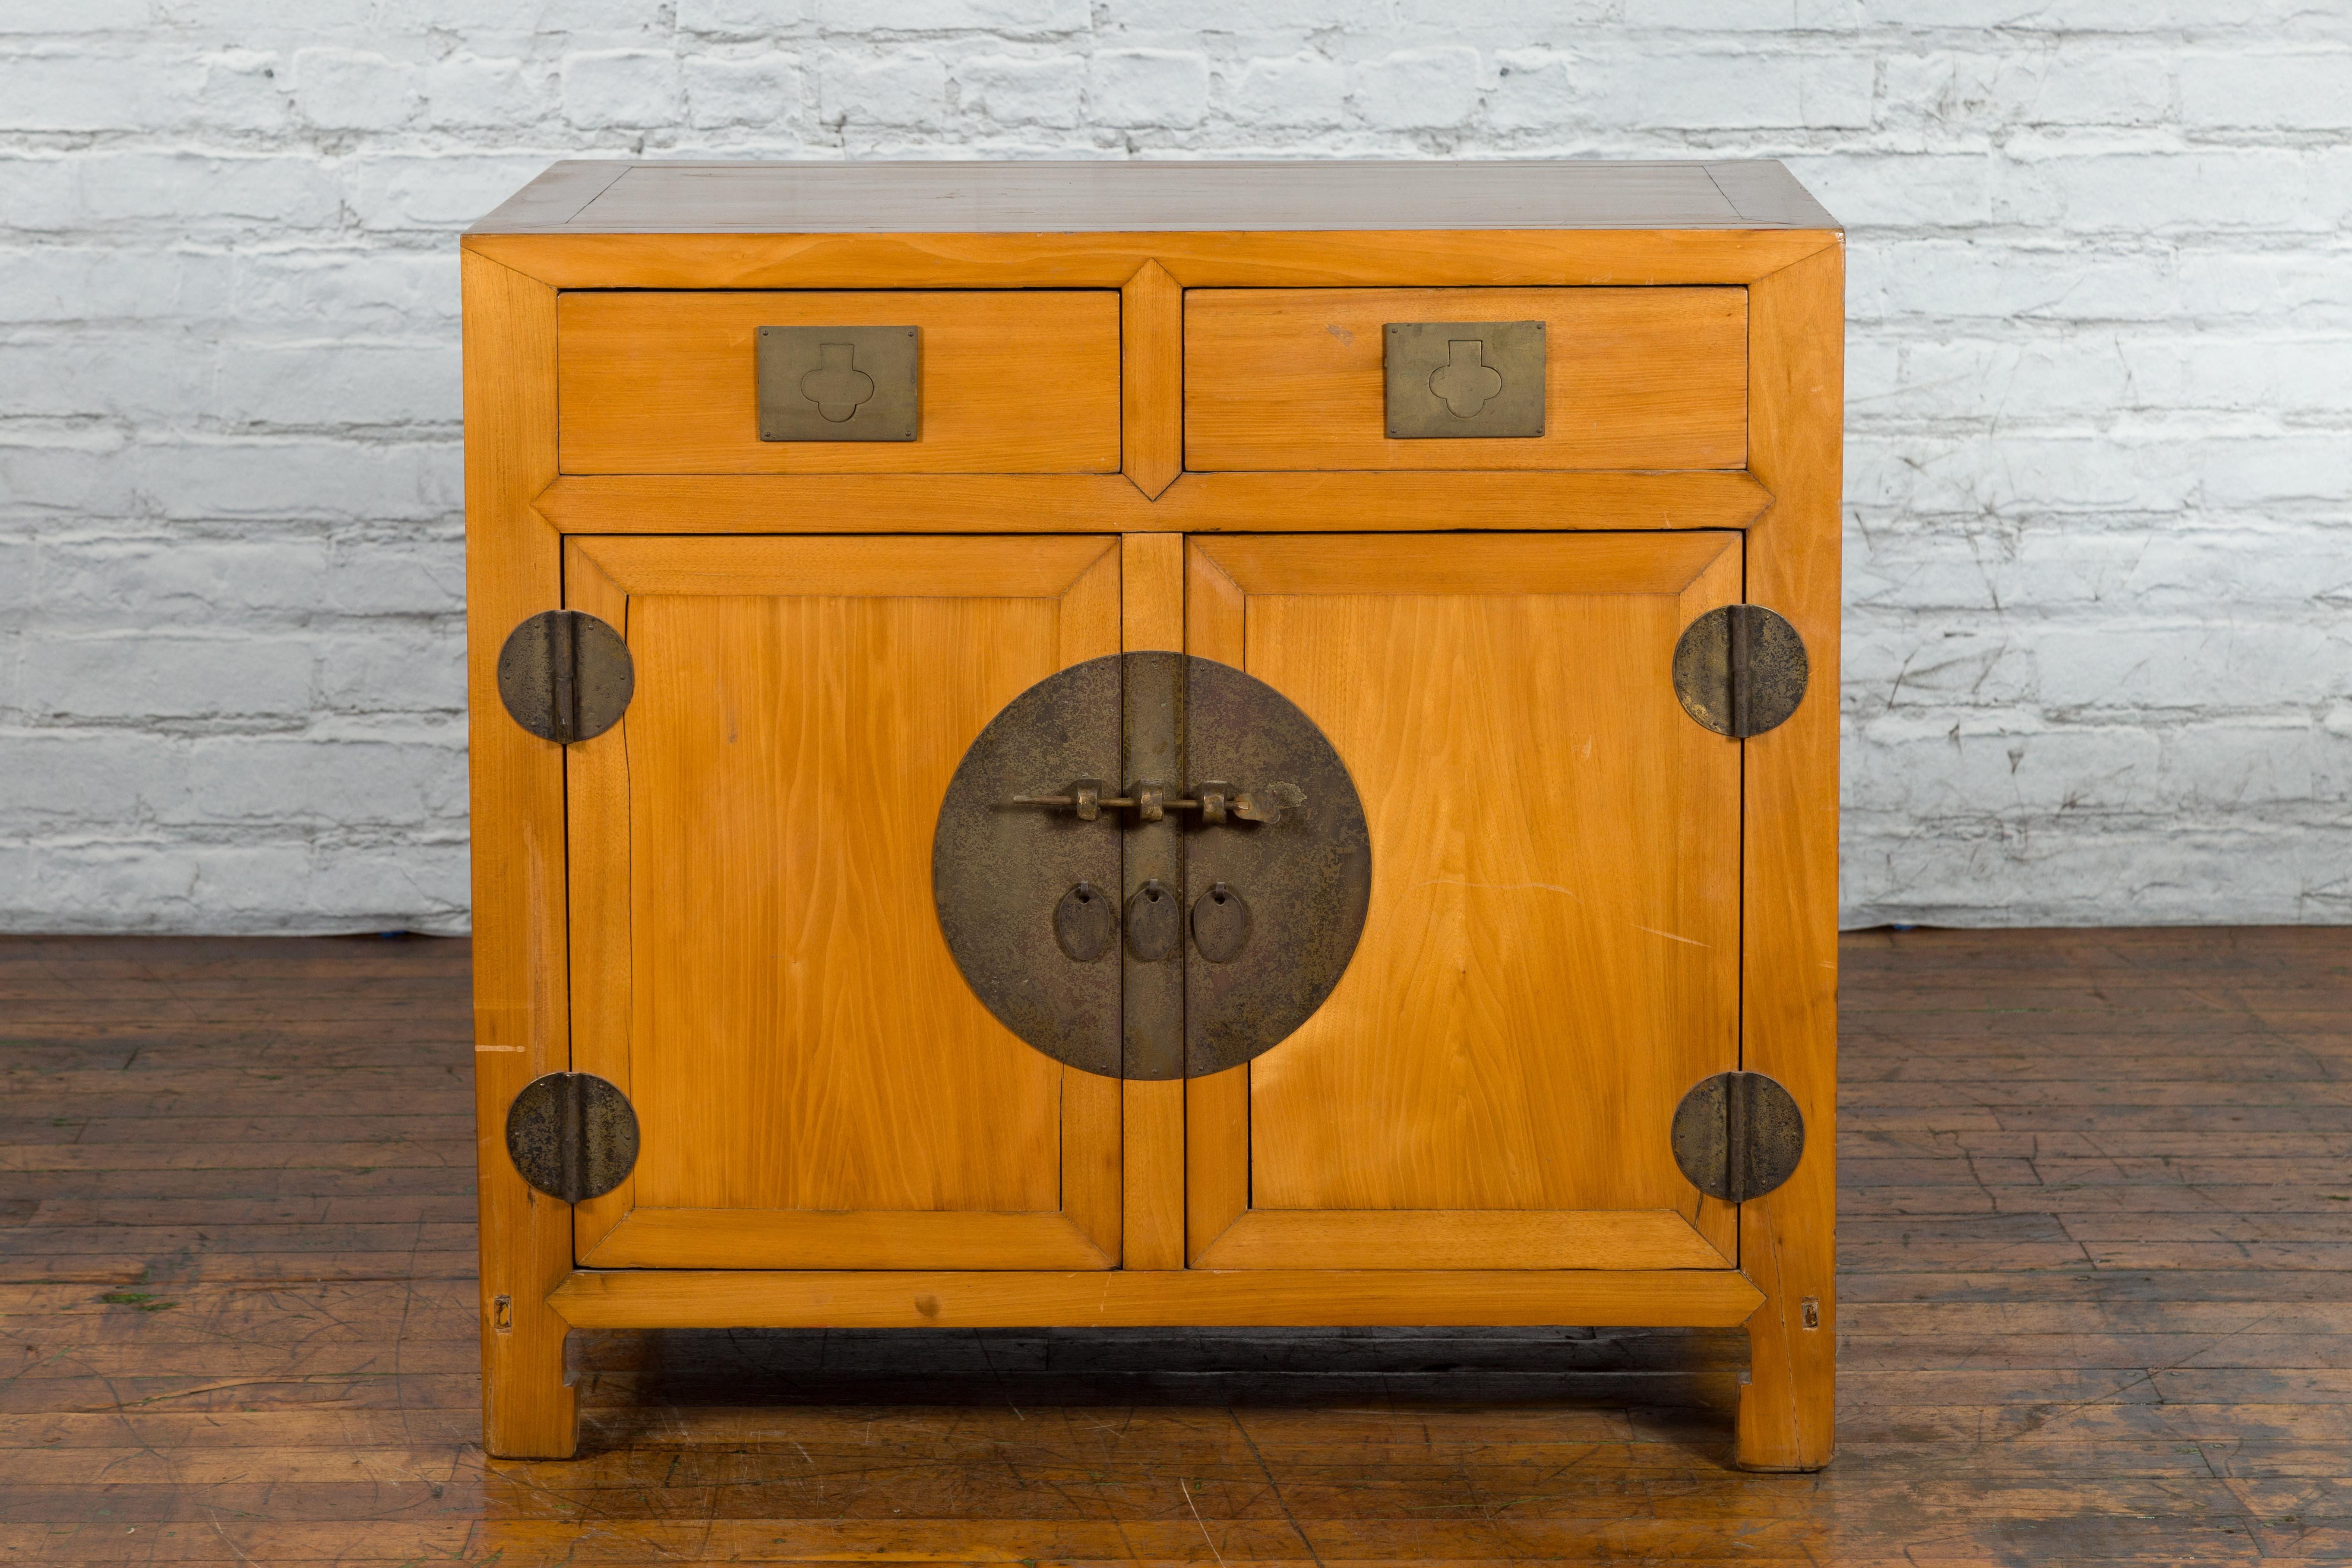 A Chinese Late Qing Dynasty period elm wood cabinet from the early 20th century, with brass medallion, teardrop pulls, two drawers and two doors on horse hoof feet. Created in China during the later years of the Qing Dynasty in the early 20th